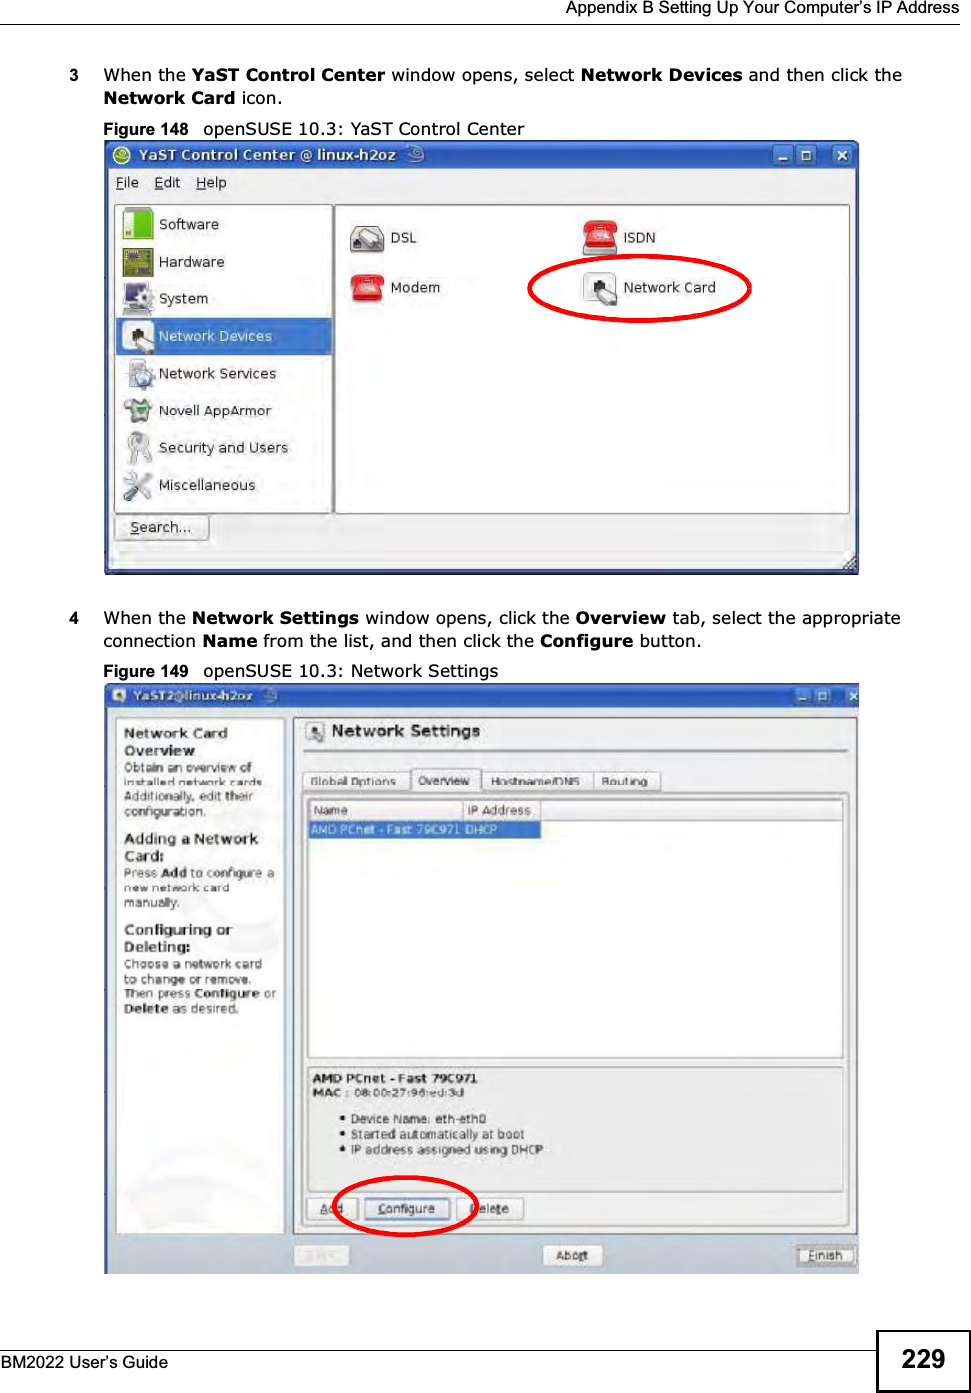  Appendix B Setting Up Your Computers IP AddressBM2022 Users Guide 2293When the YaST Control Center window opens, select Network Devices and then click the Network Card icon.Figure 148   openSUSE 10.3: YaST Control Center4When the Network Settings window opens, click the Overview tab, select the appropriate connection Name from the list, and then click the Configure button. Figure 149   openSUSE 10.3: Network Settings